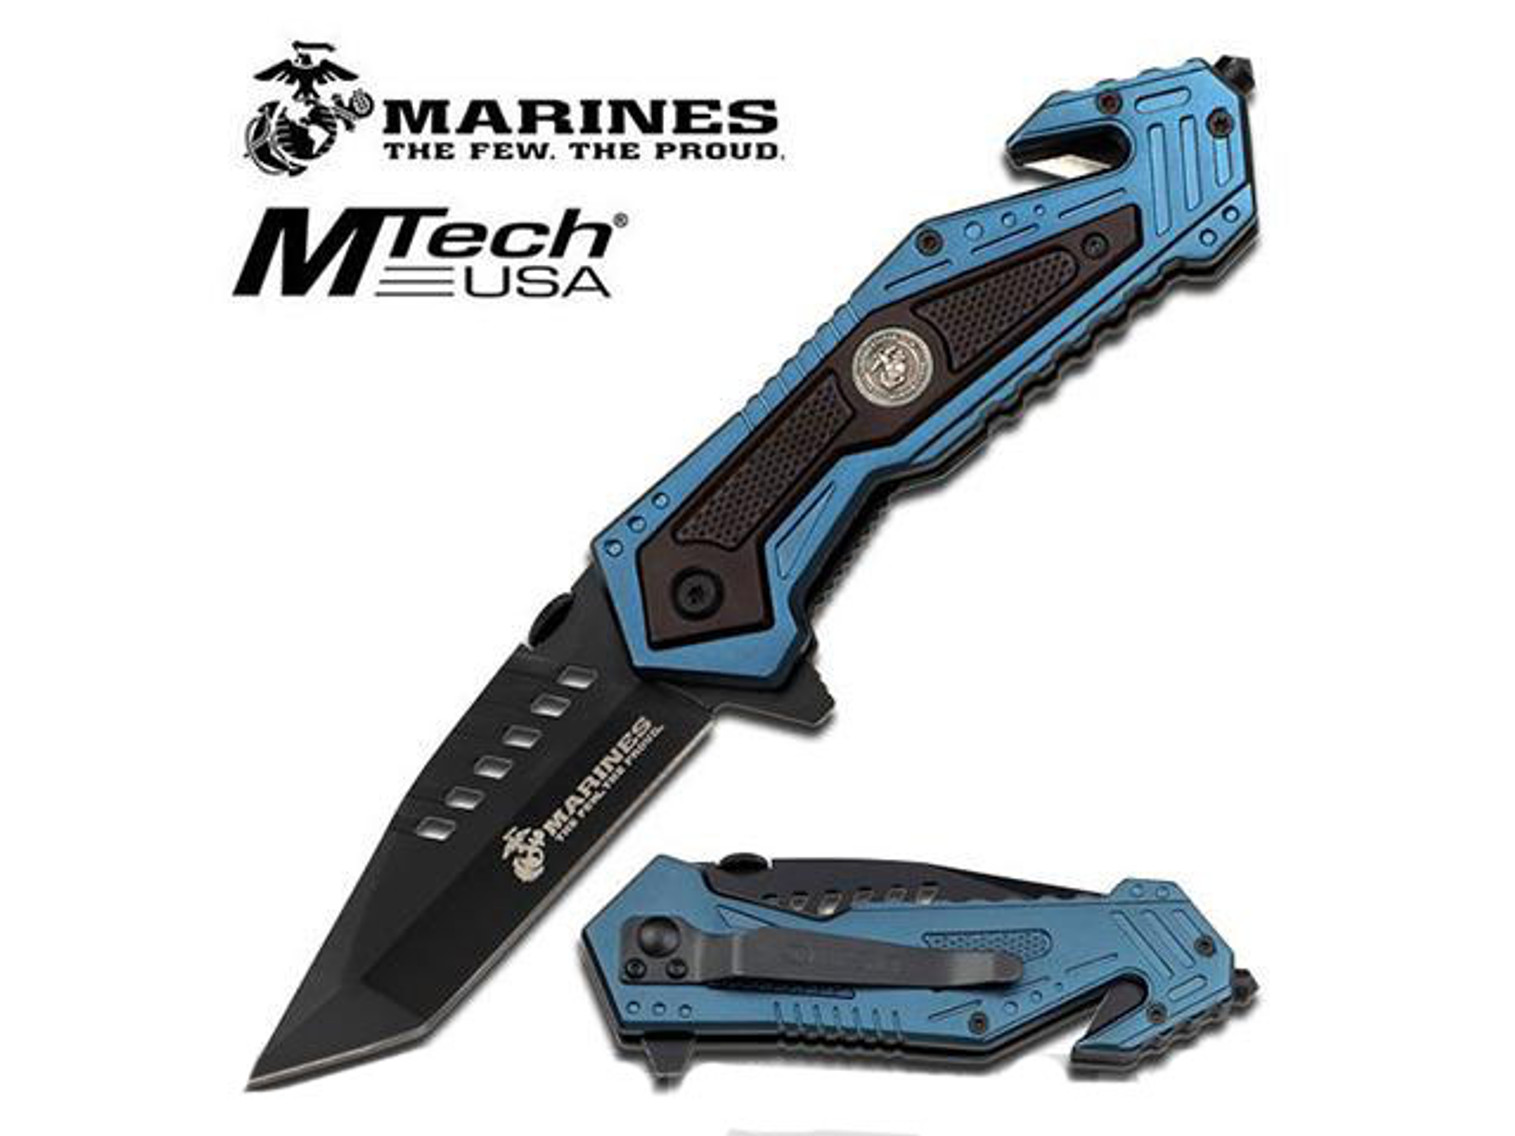 Marines 4.75" "Salvager" Folding Rescue Knife with Seatbelt Cutter and Glass Breaker - Blue